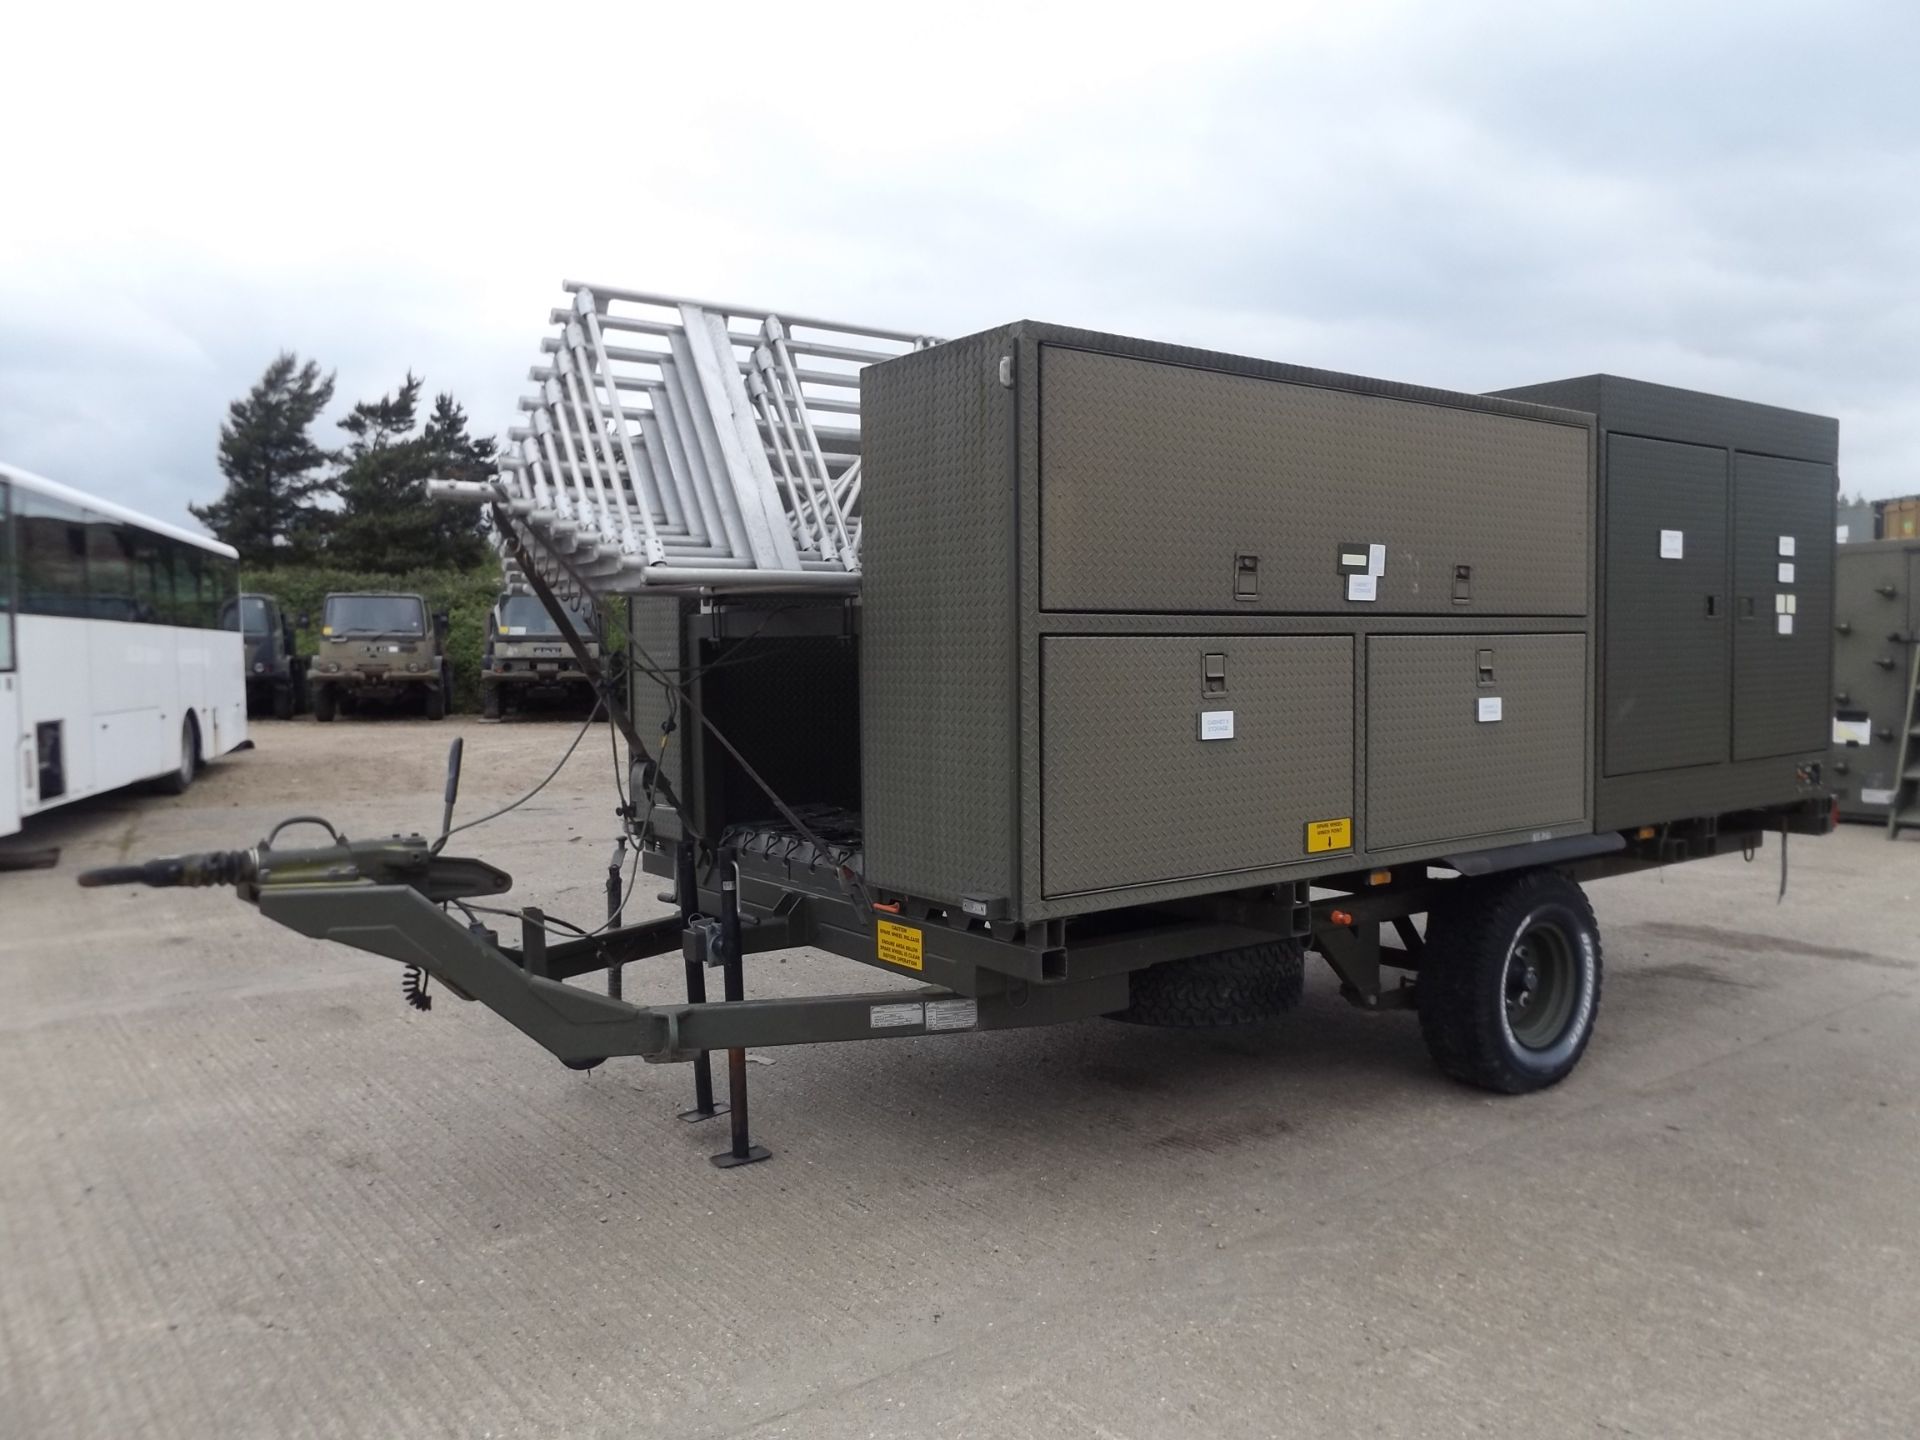 Deployable TUP-3 MW AM Broadcast Mobile Antenna System.